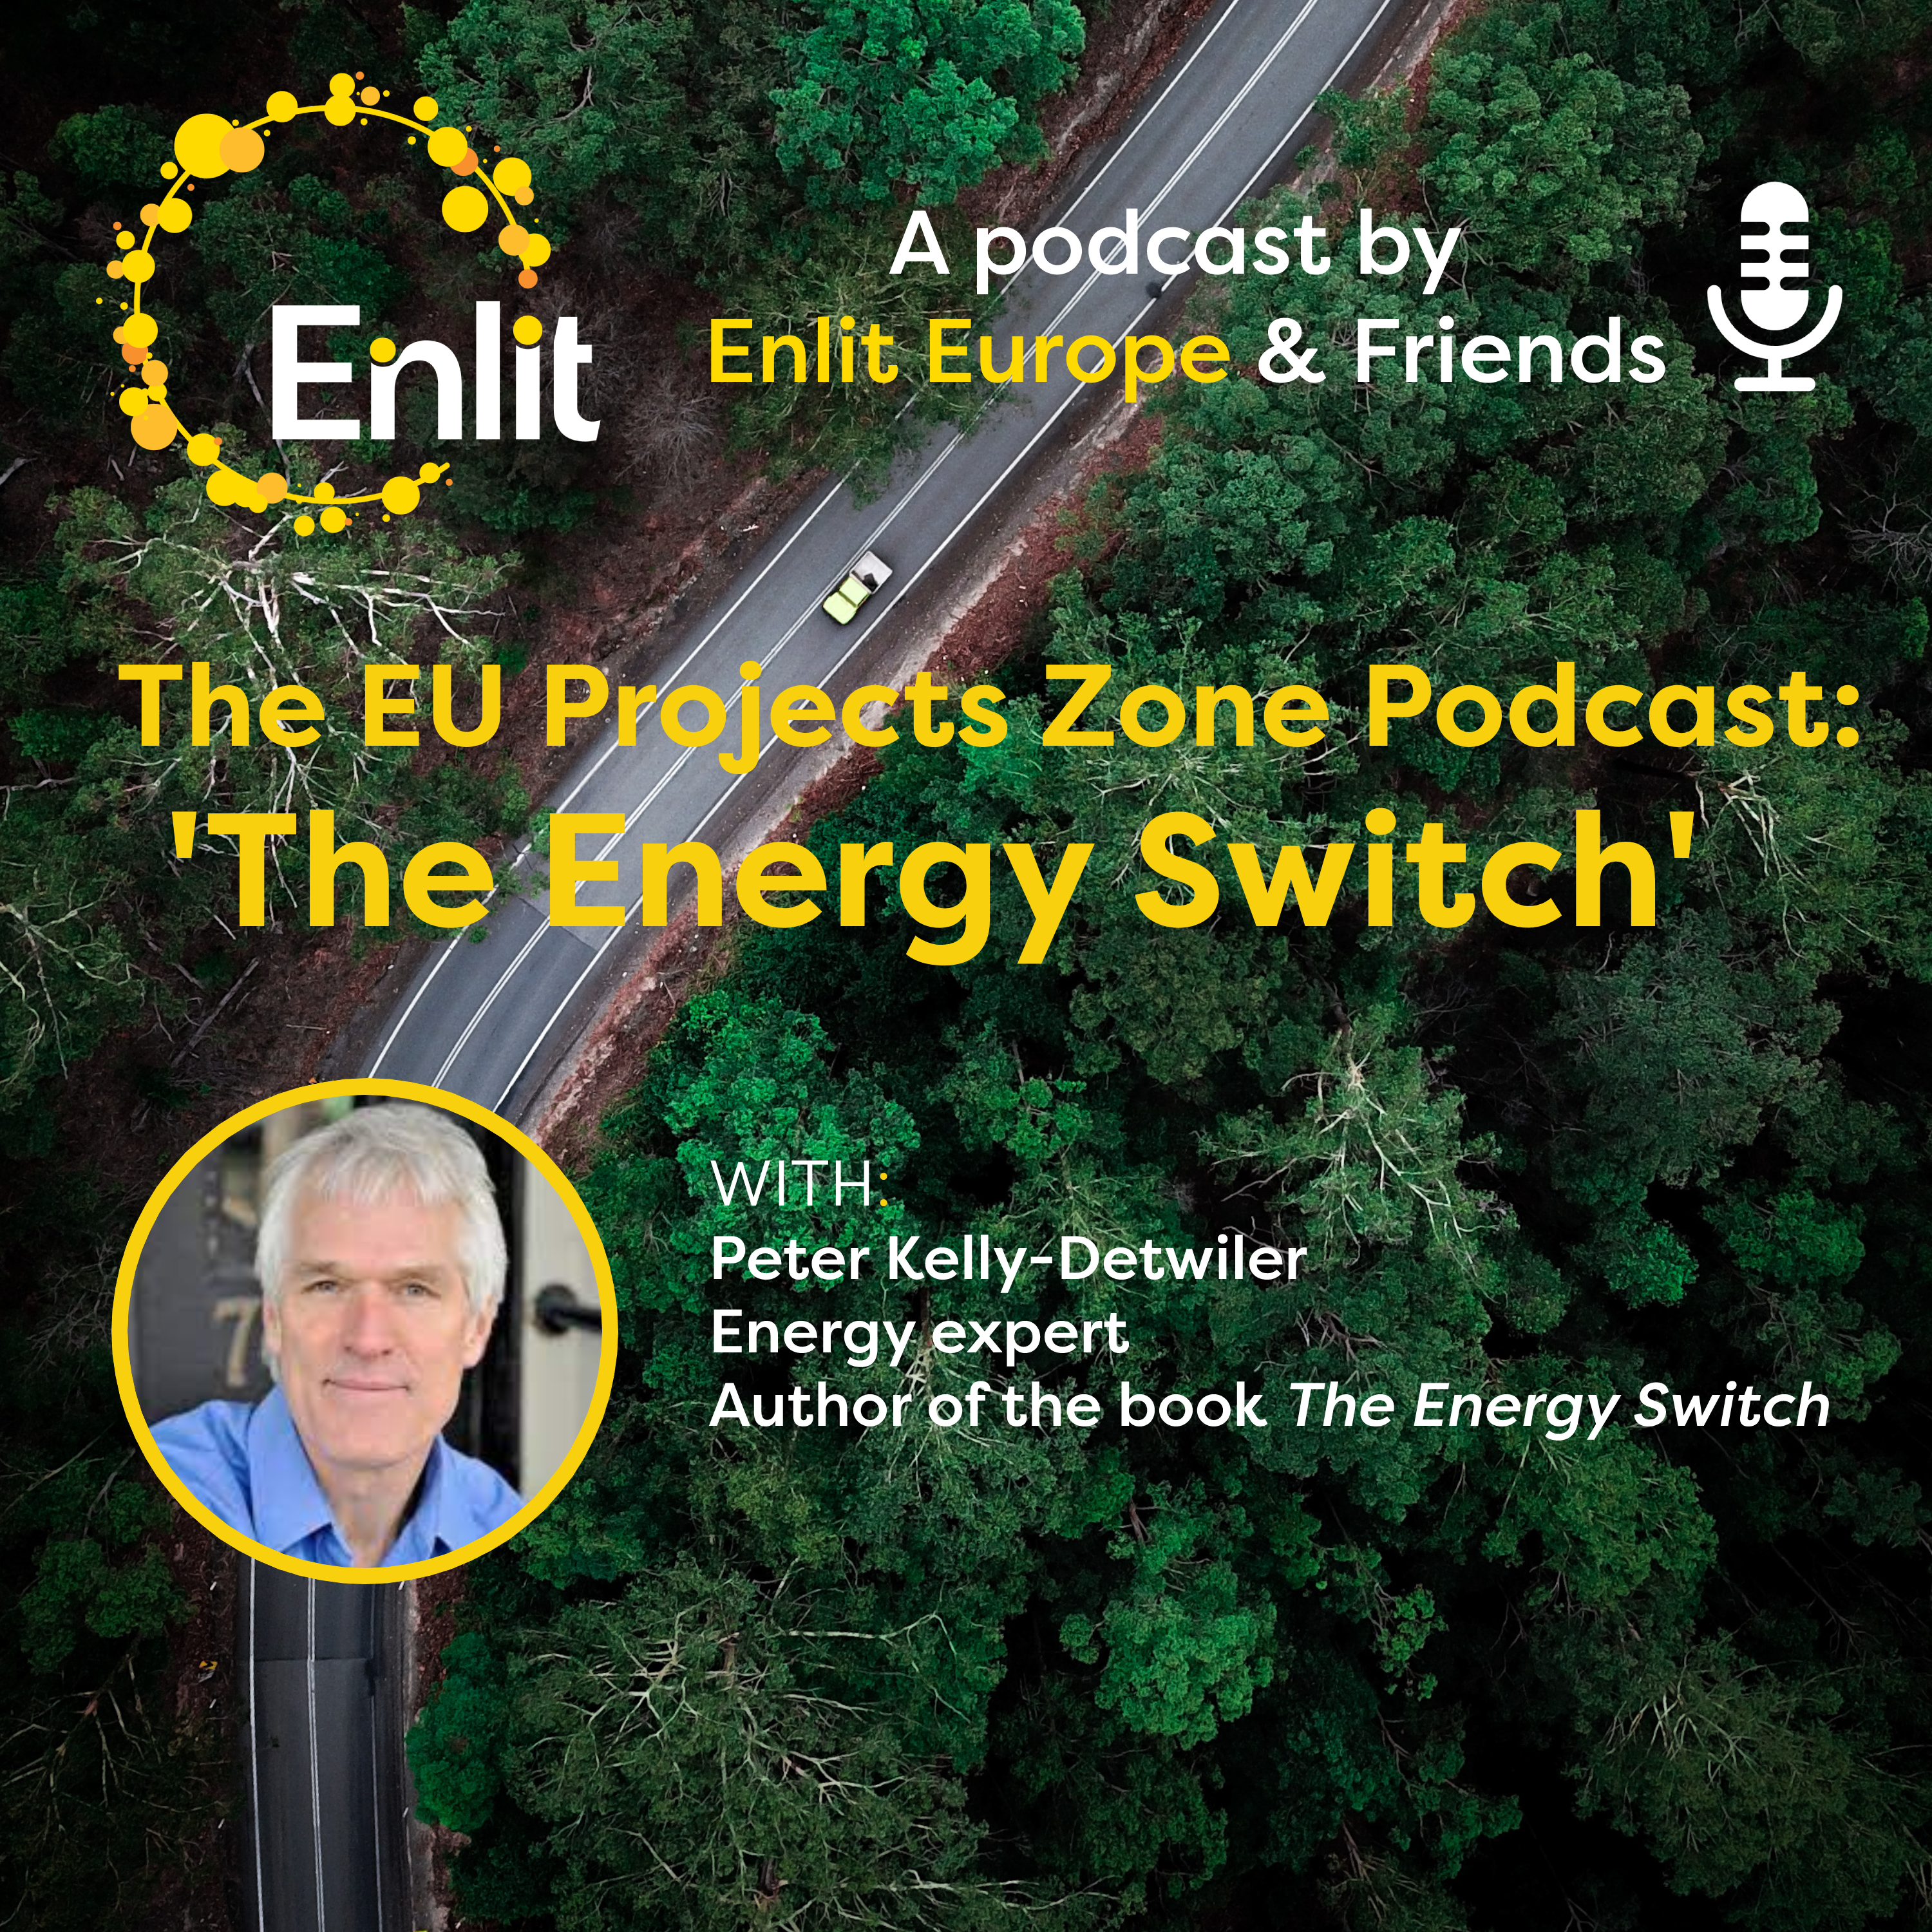 The EU Project Zone Podcast: 'The Energy Switch' with Peter Kelly-Detwiler